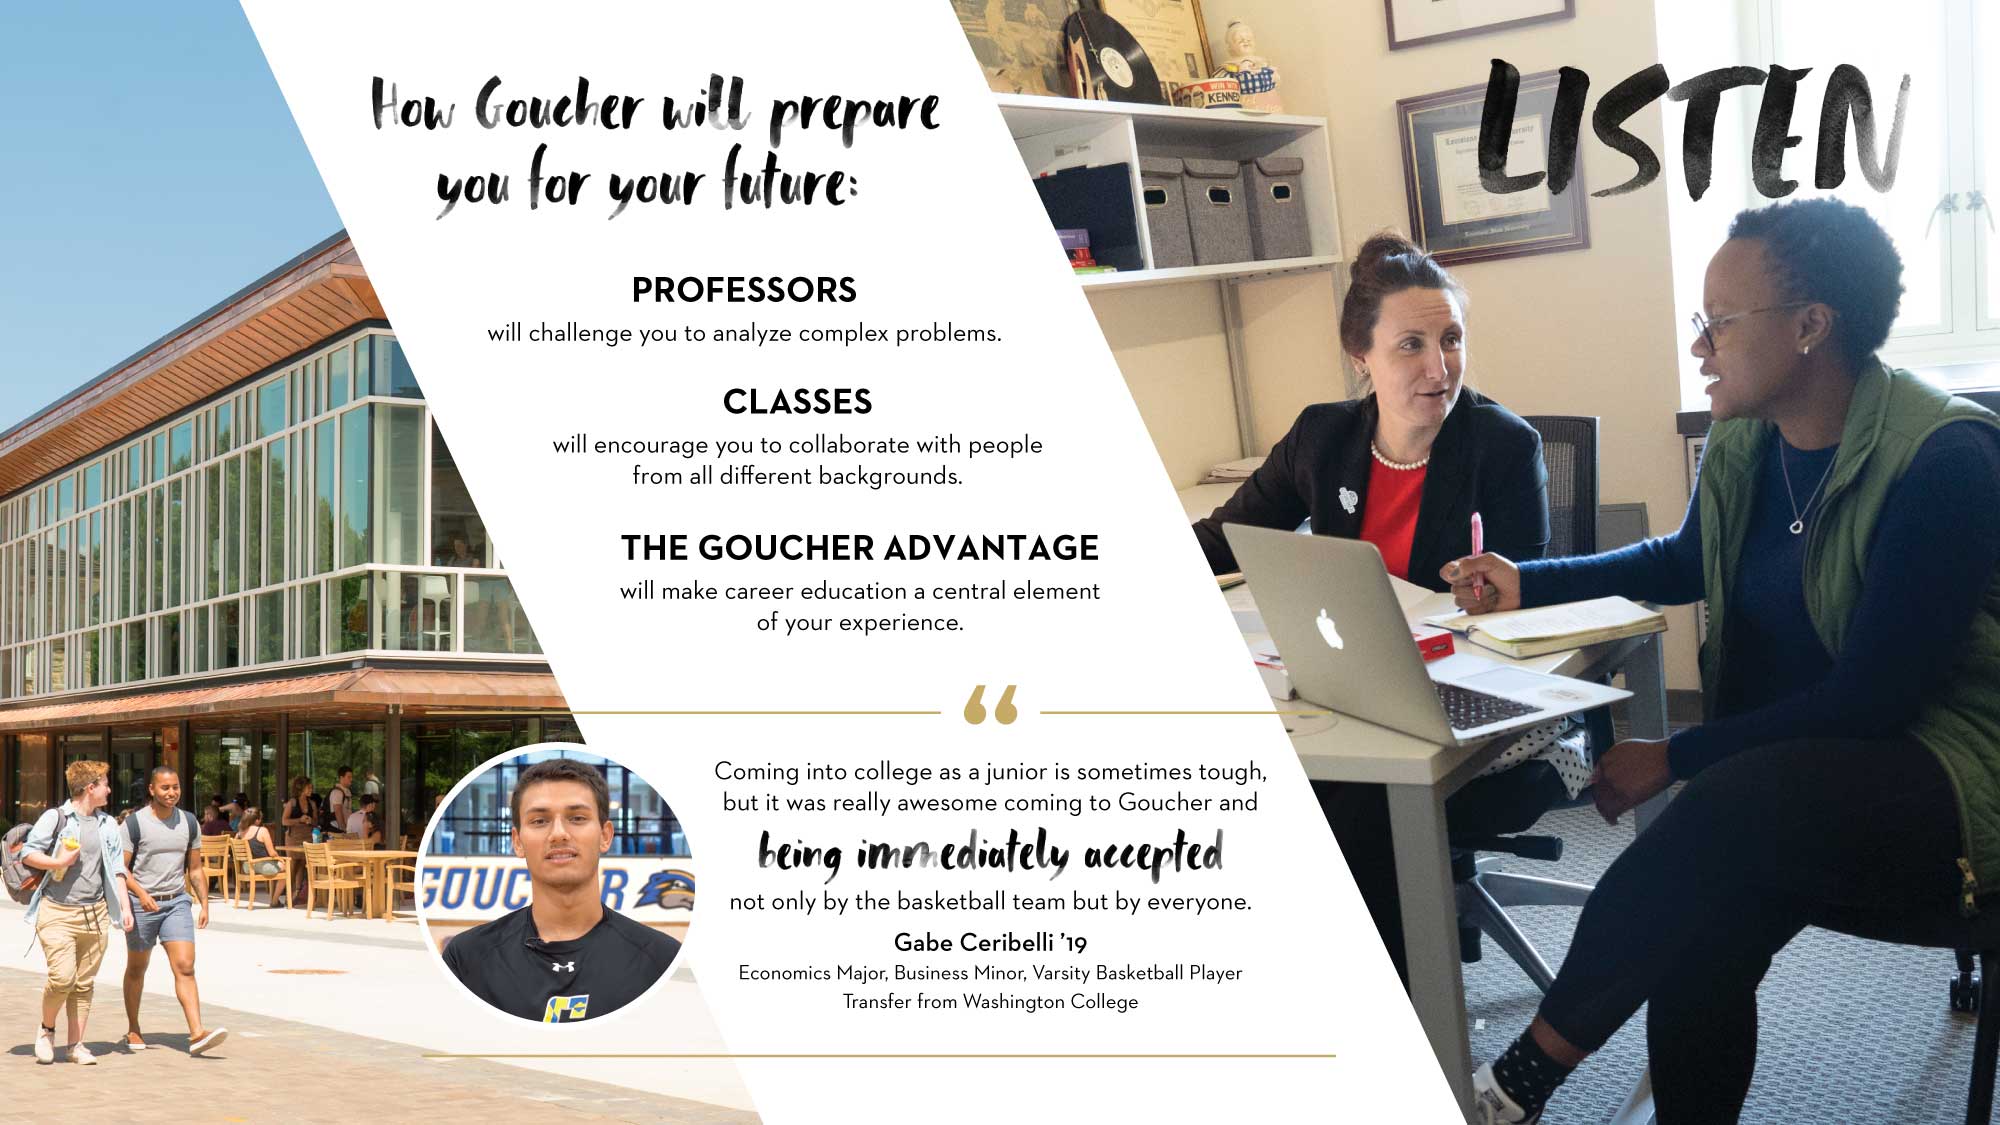 how Goucher will prepare you for your future college: professors, classes, the goucher advantage